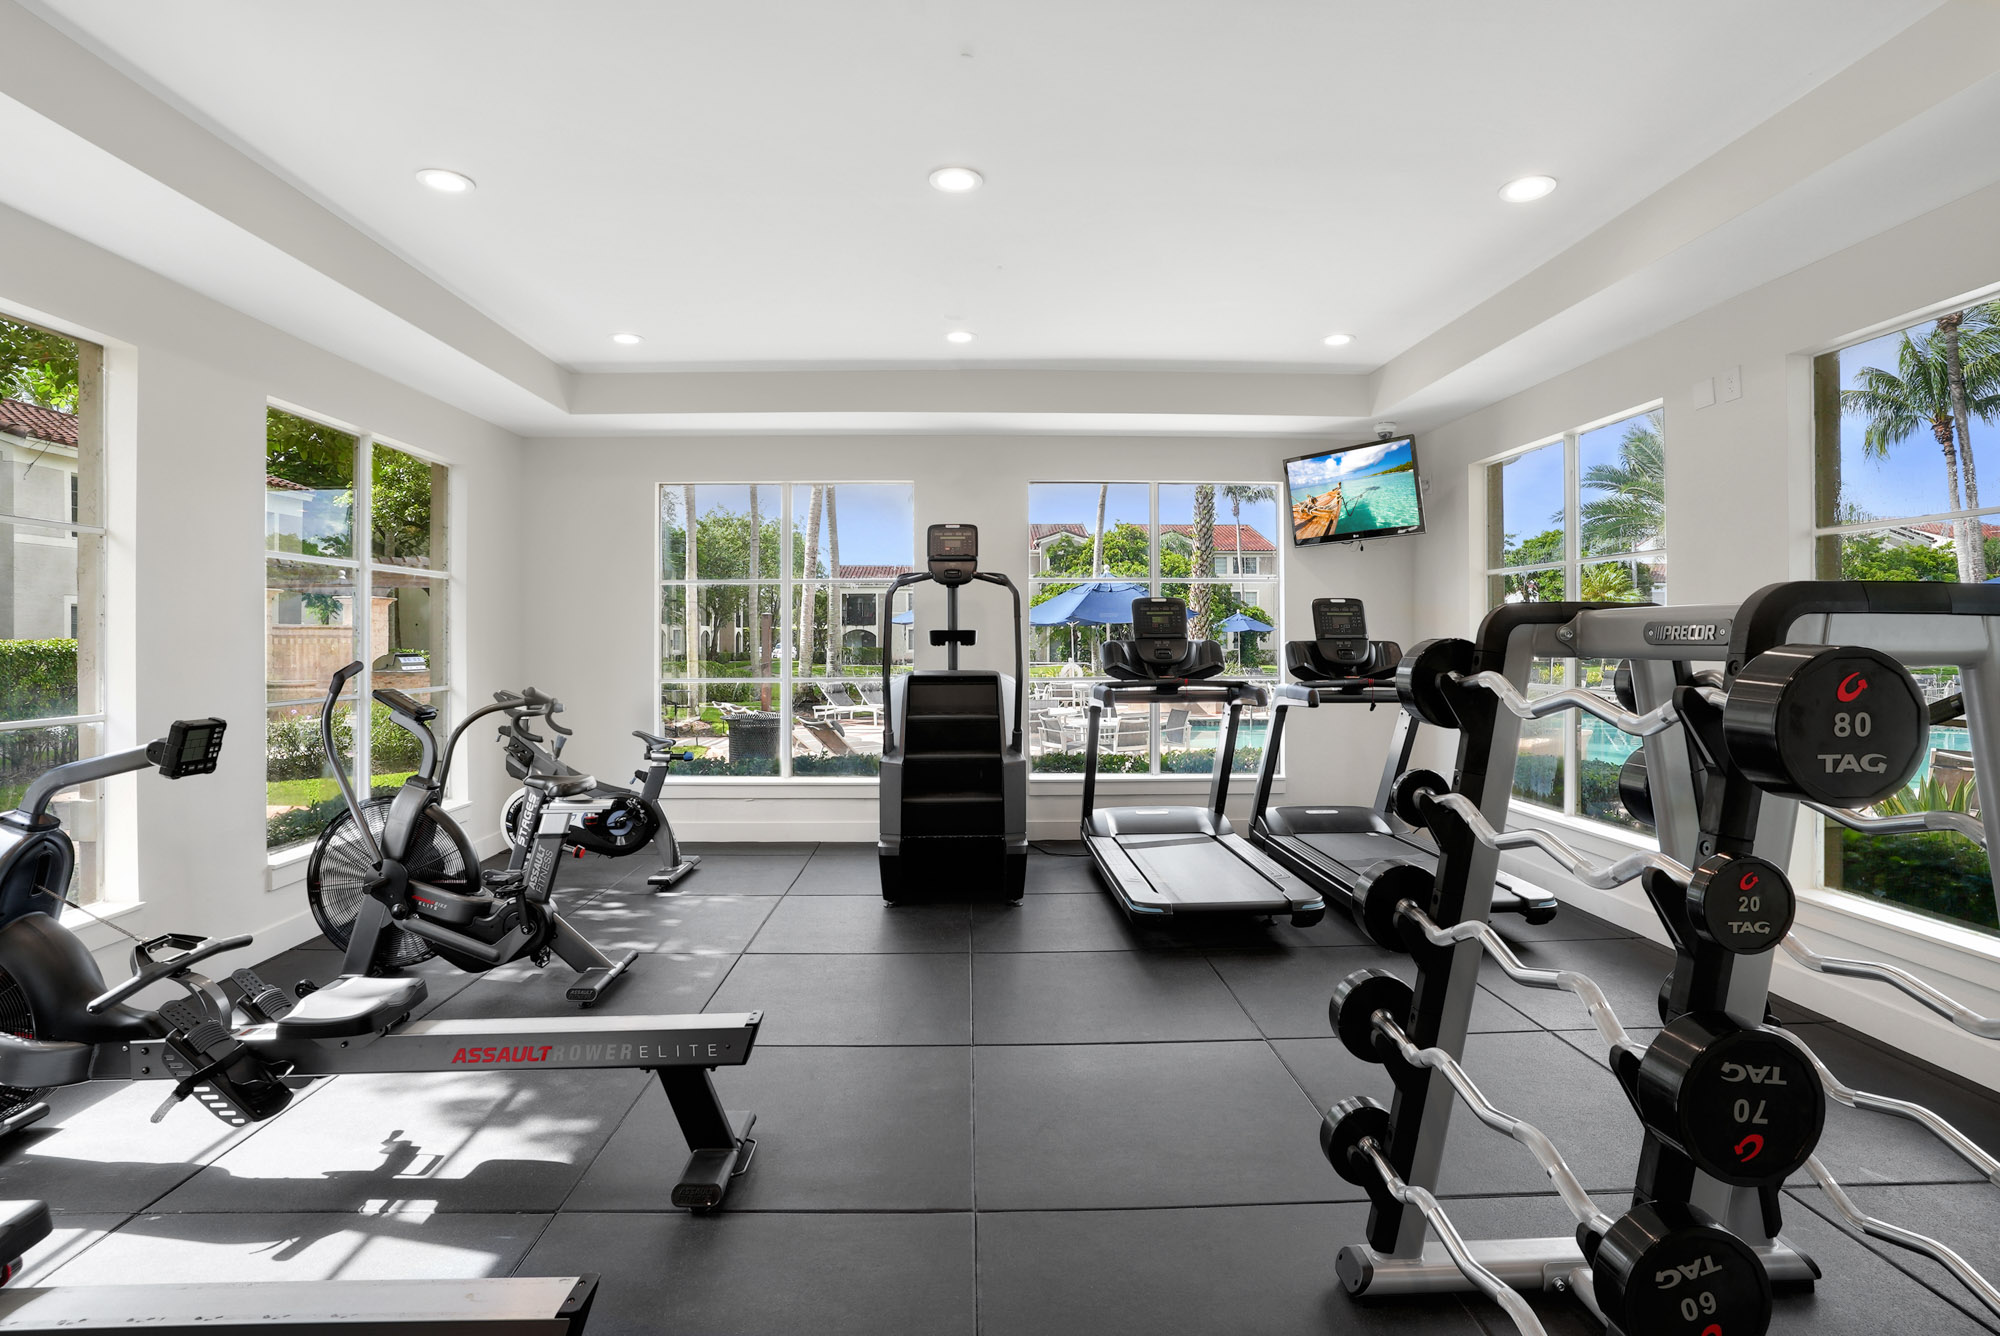 The fitness center at Miramar Lake in Fort Lauderdale, FL.